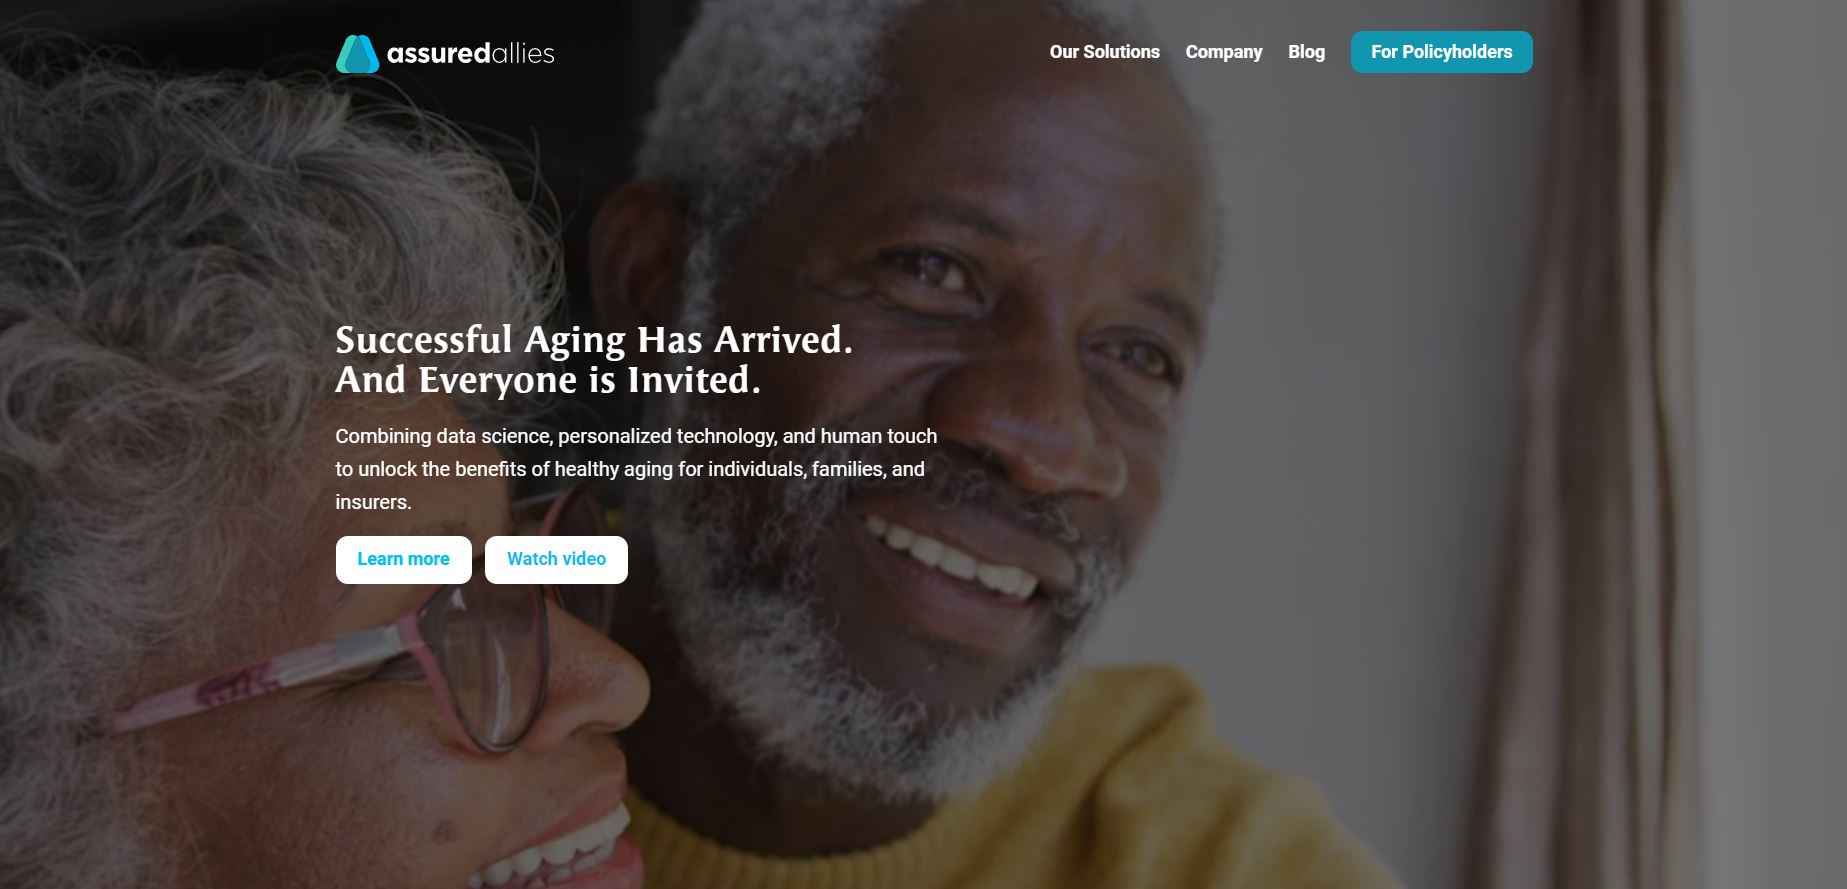 Assured Allies is not your typical insurance company, this startup has raised an impressive $42.5M in Series B funding